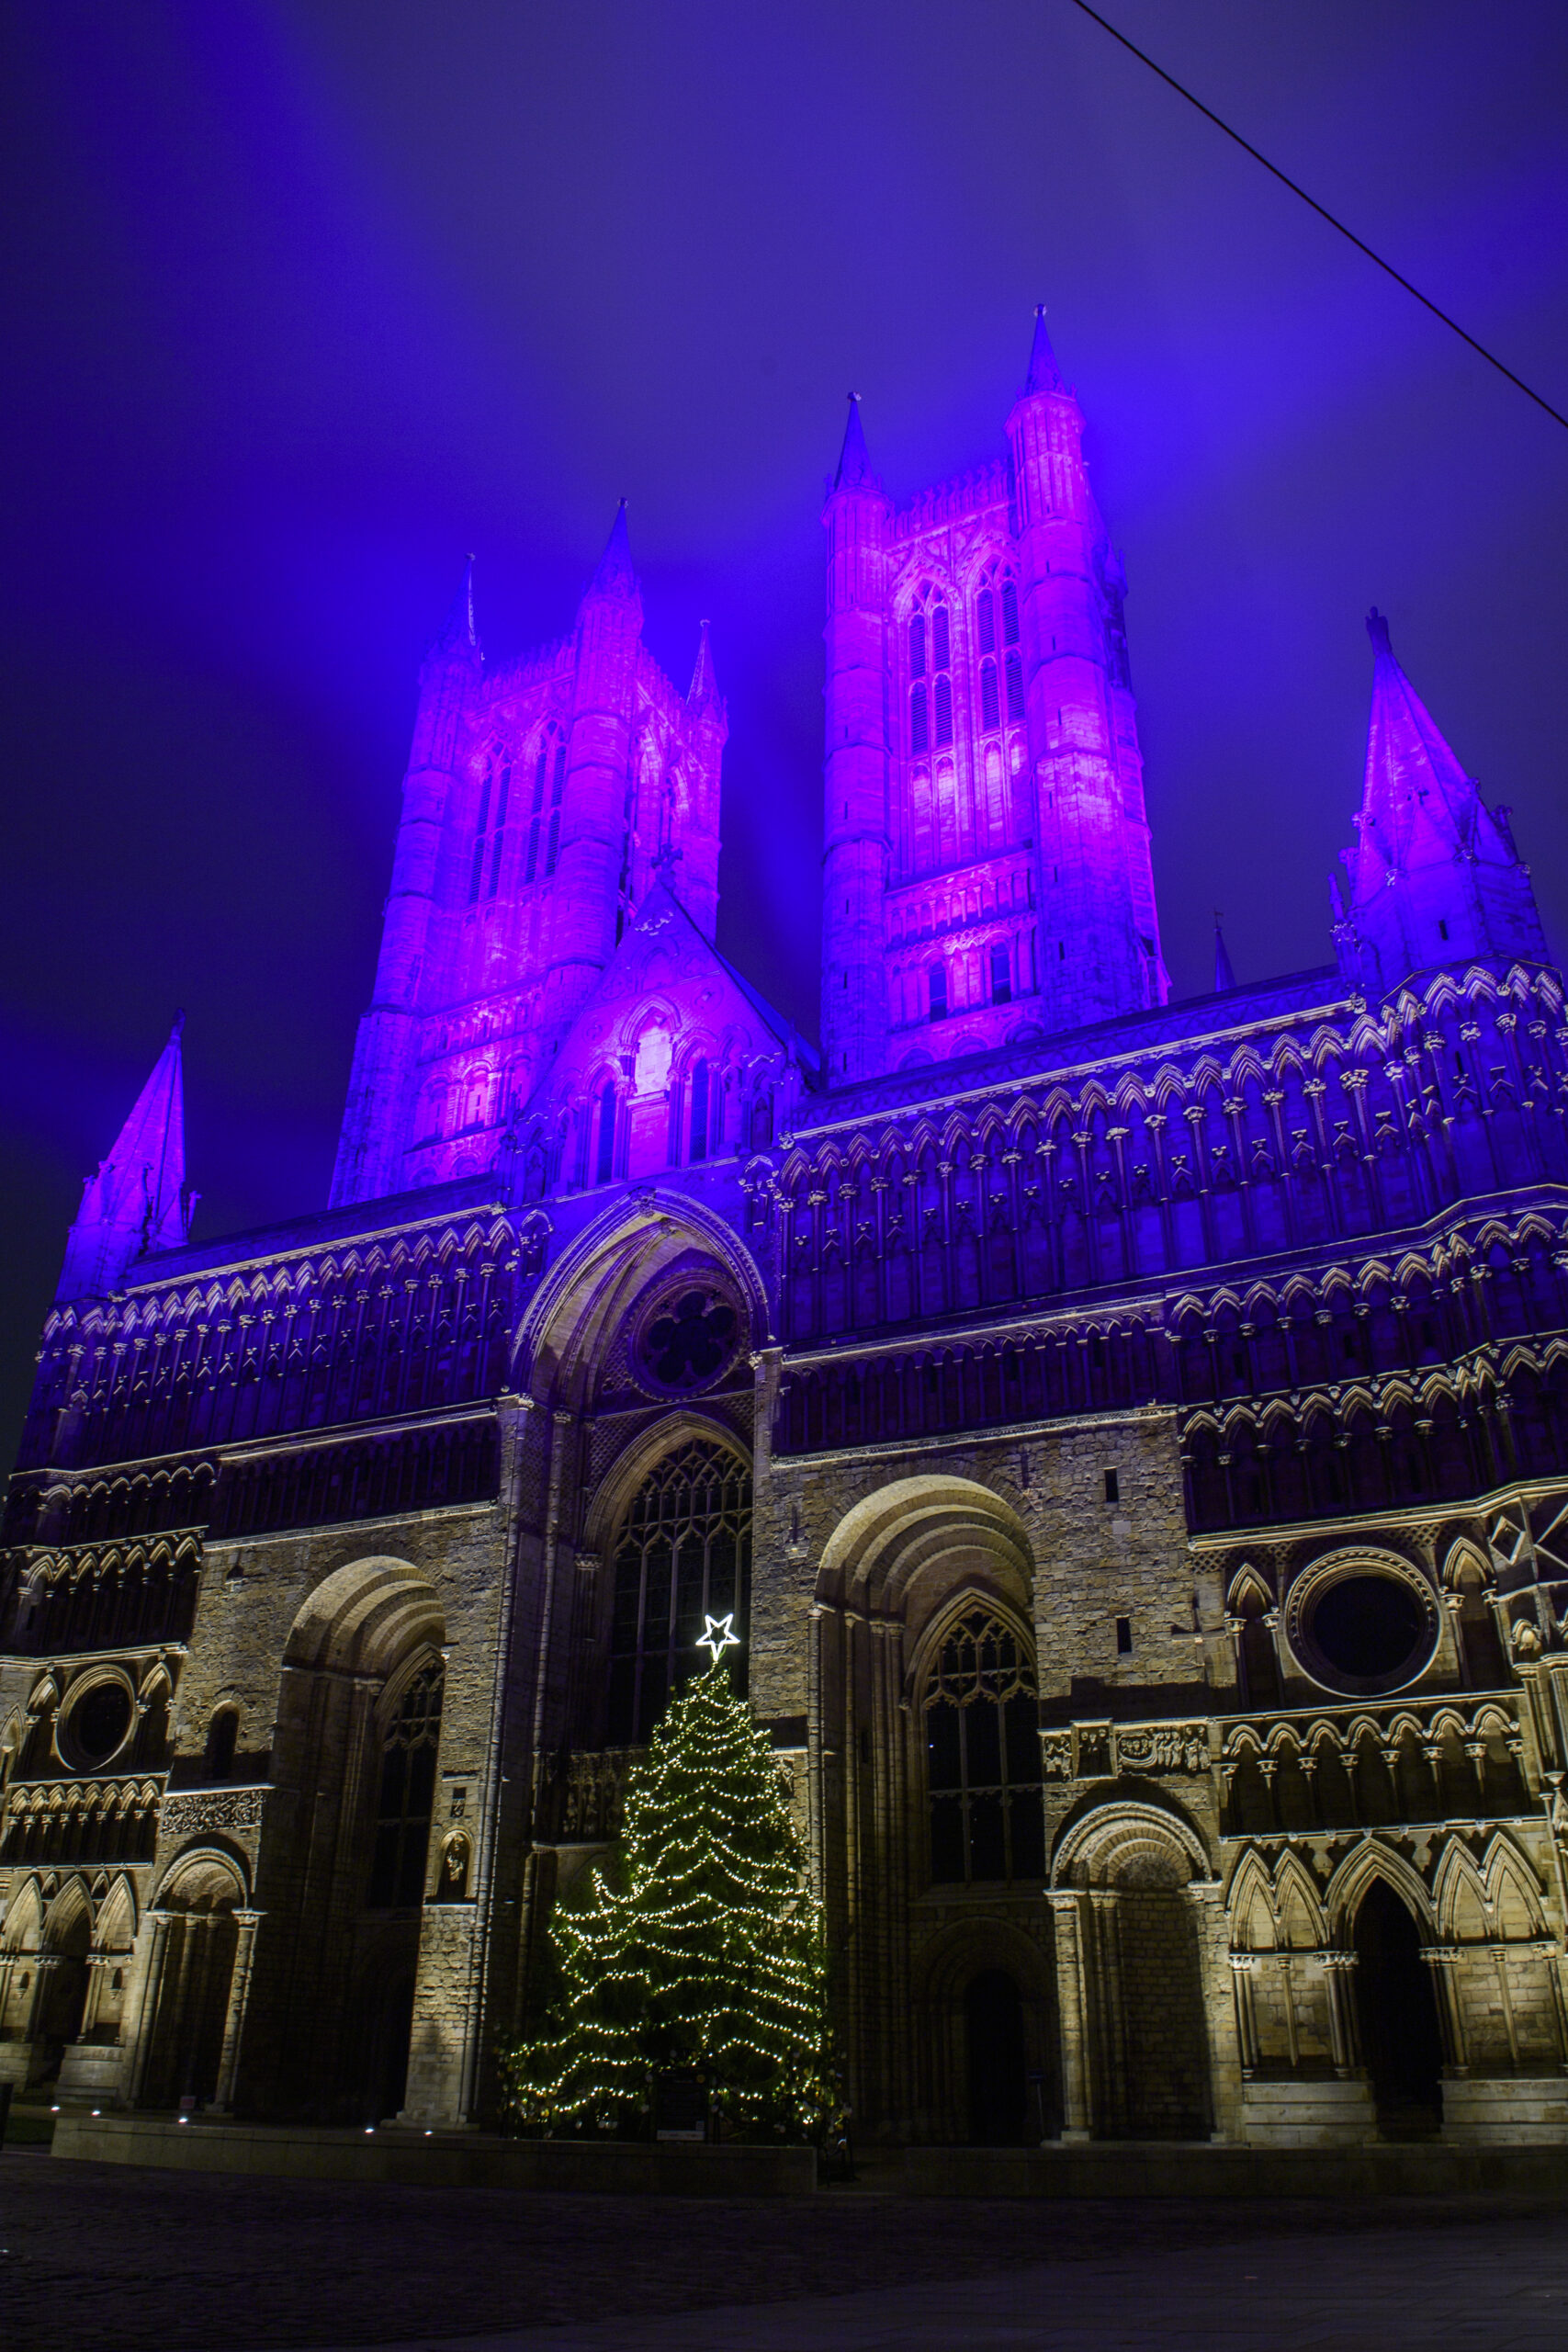 Christmas Tree decorated with Warm White Lights displayed outside Lincoln Cathedral for the Christmas season.